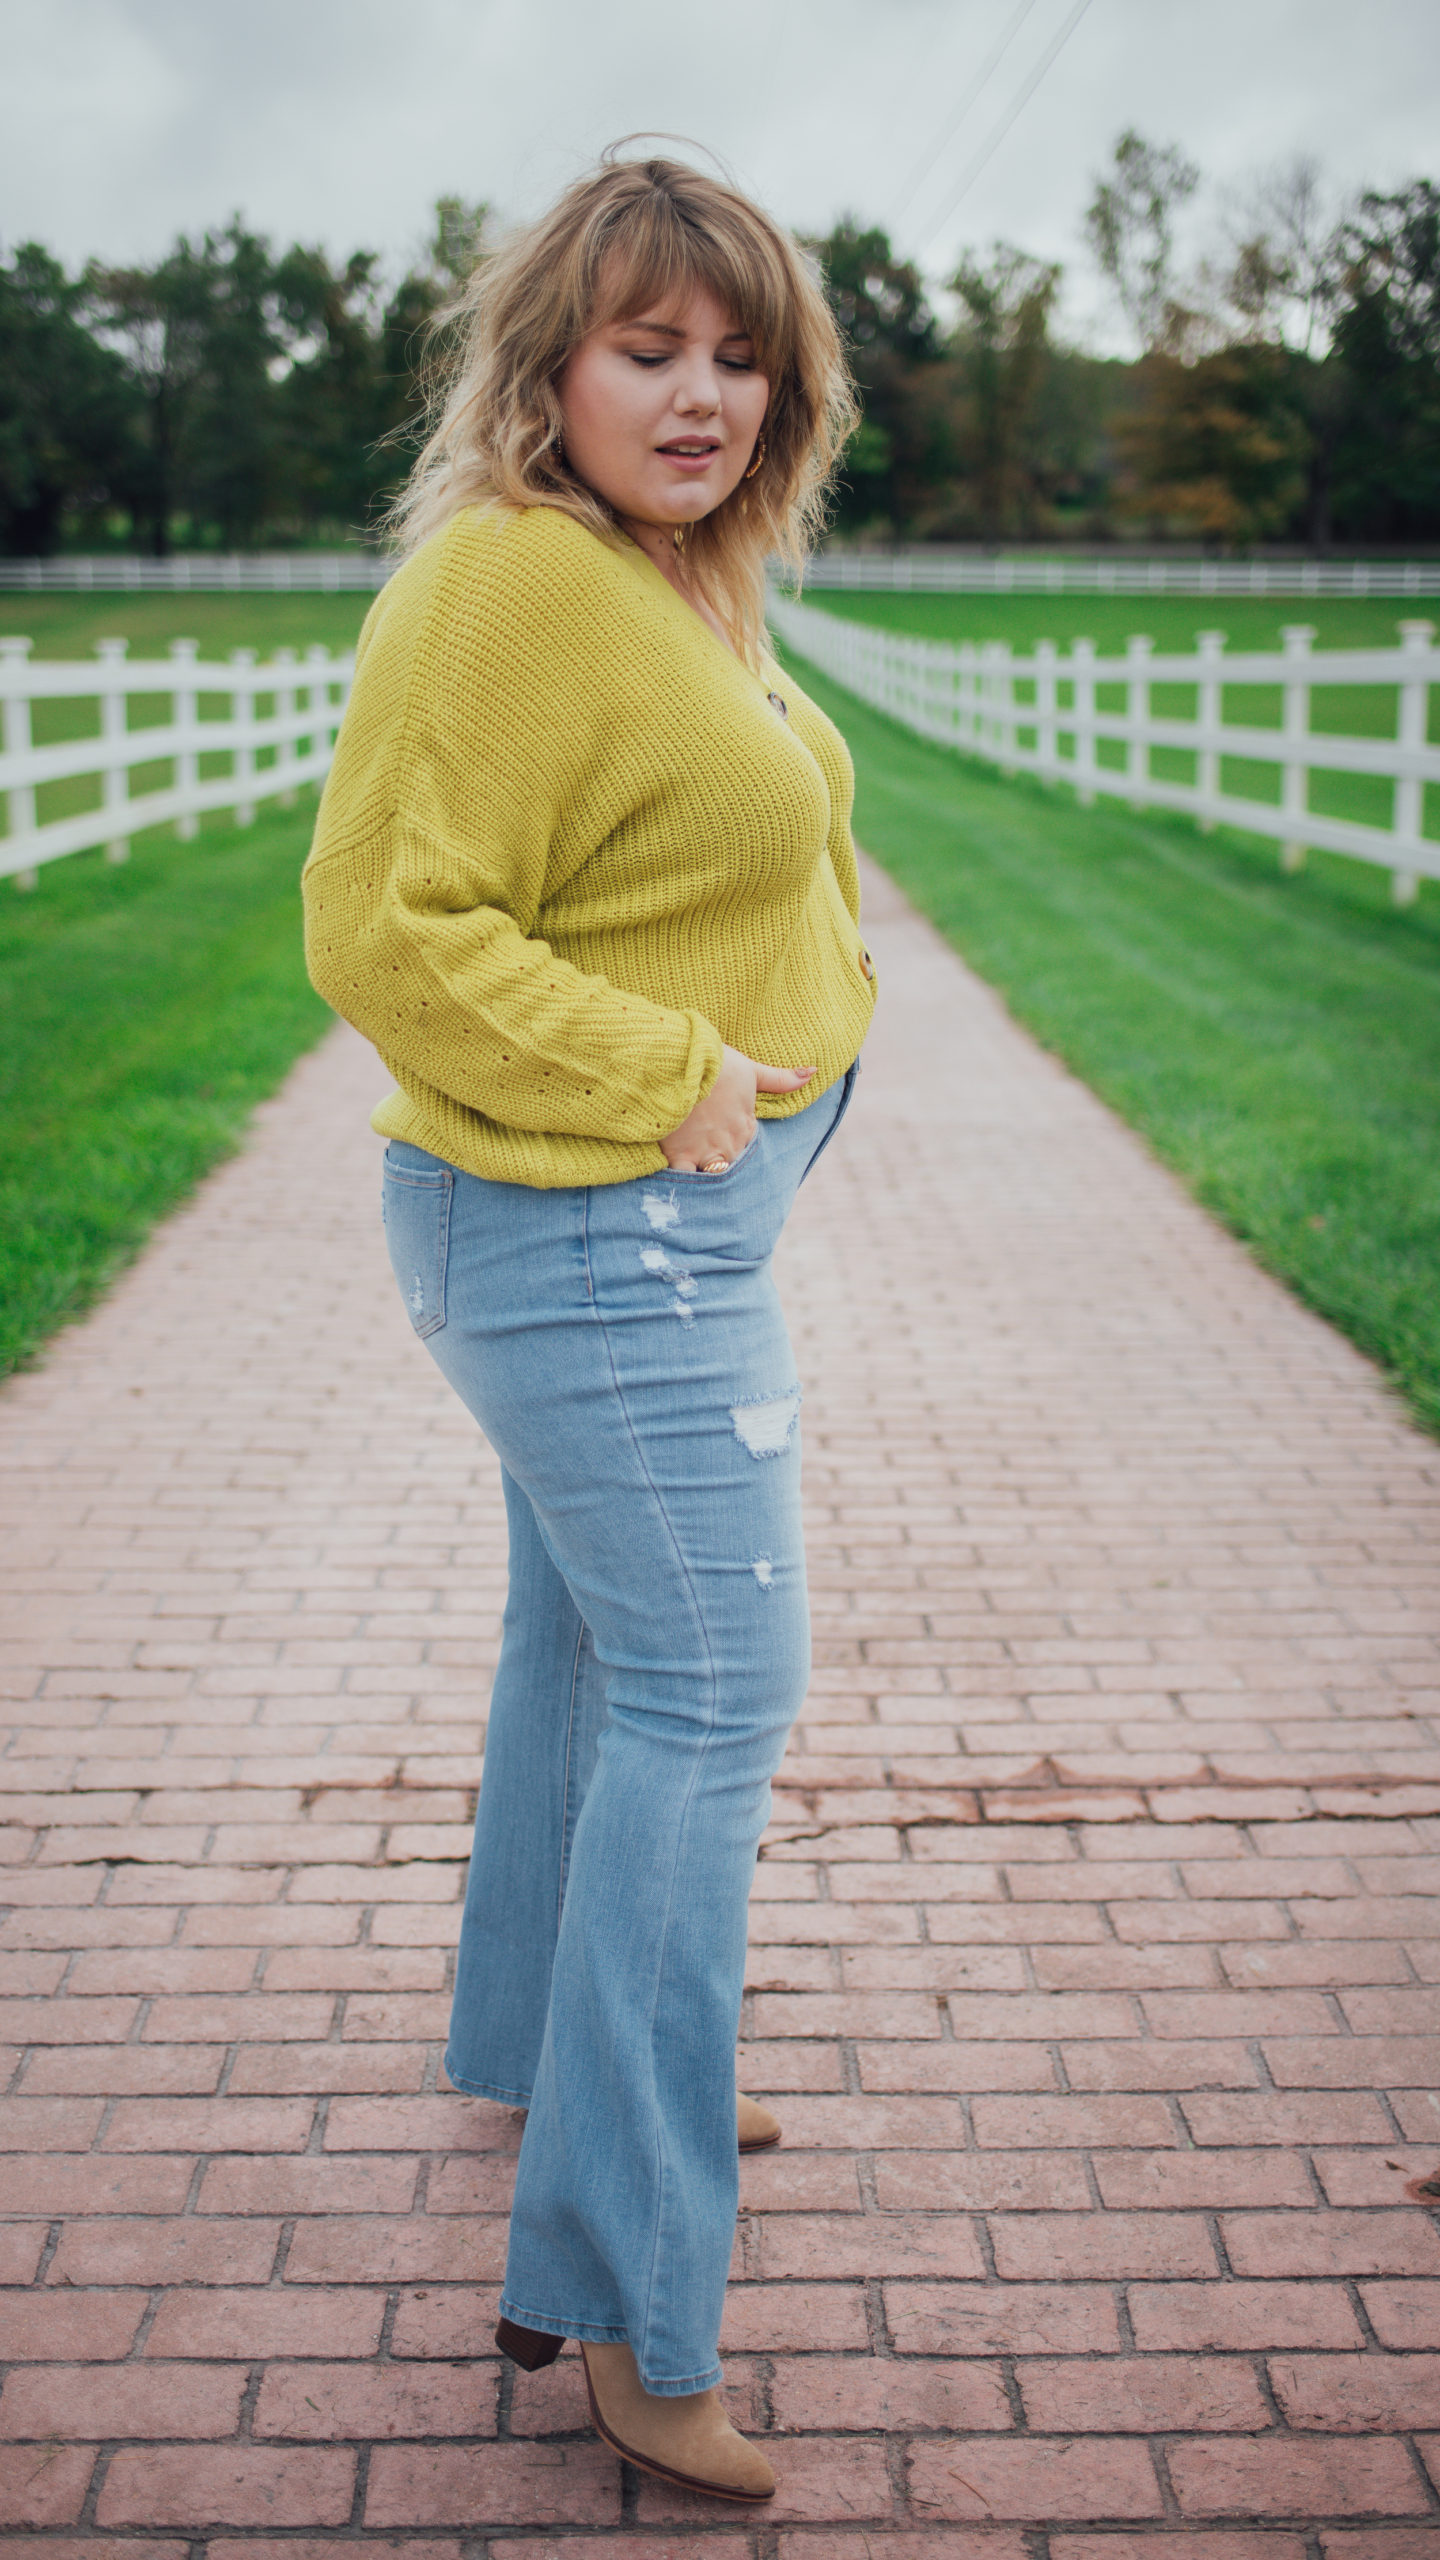 Sharing some cute sweaters from the brand Cato, and a chic cardigan and flare denim outfit! I styled a plus size green cardigan from Cato.